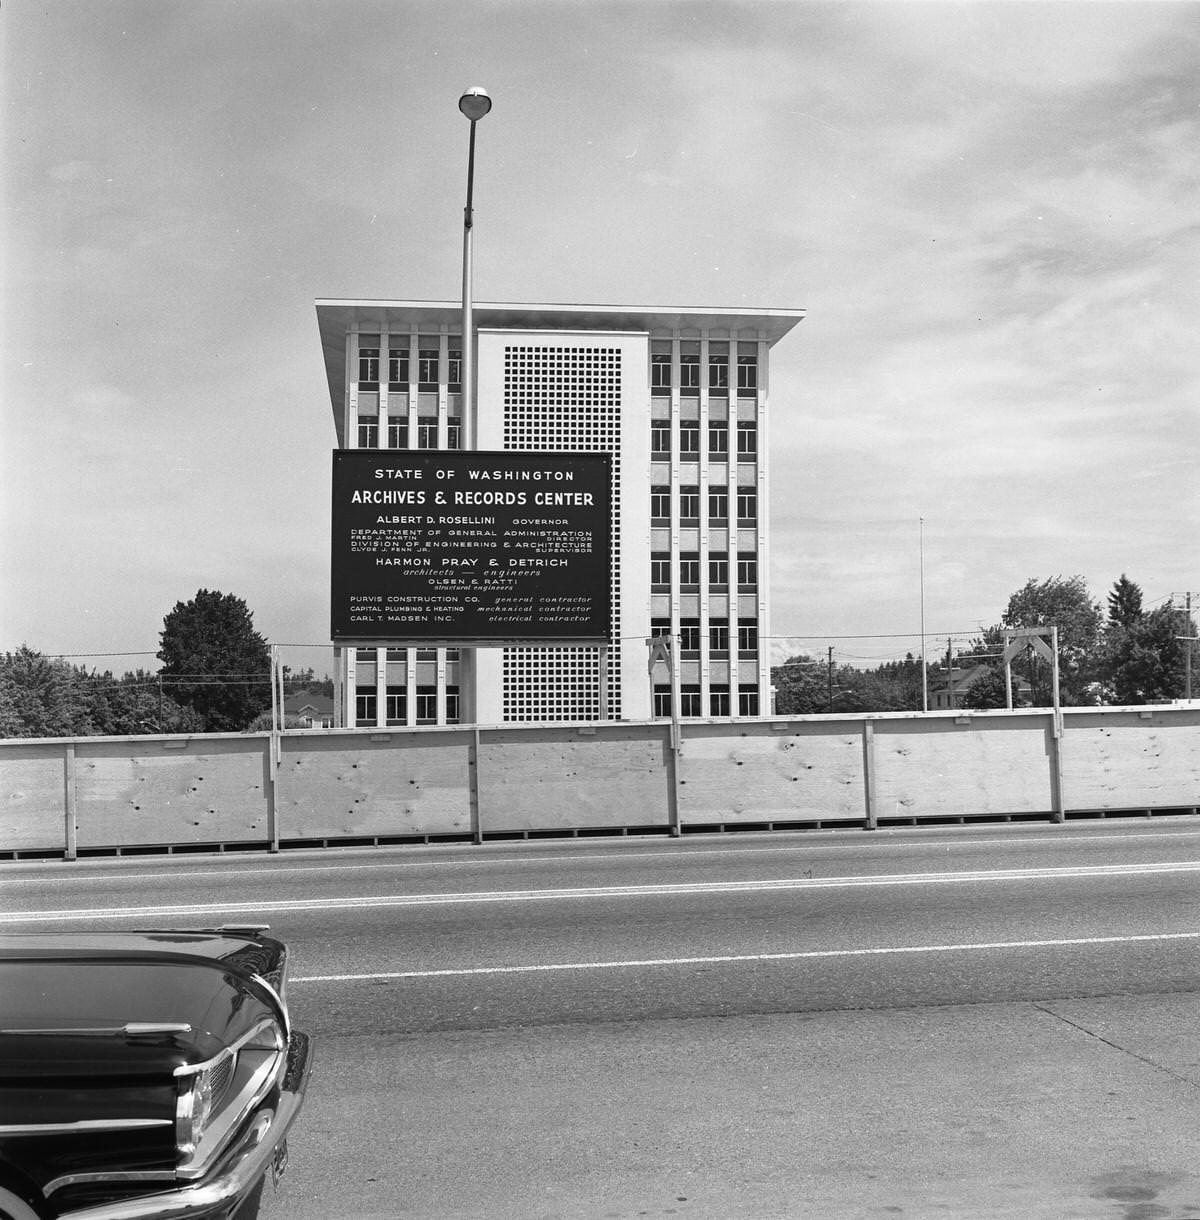 State of Washington Archives and Records Center building site and sign, 1962